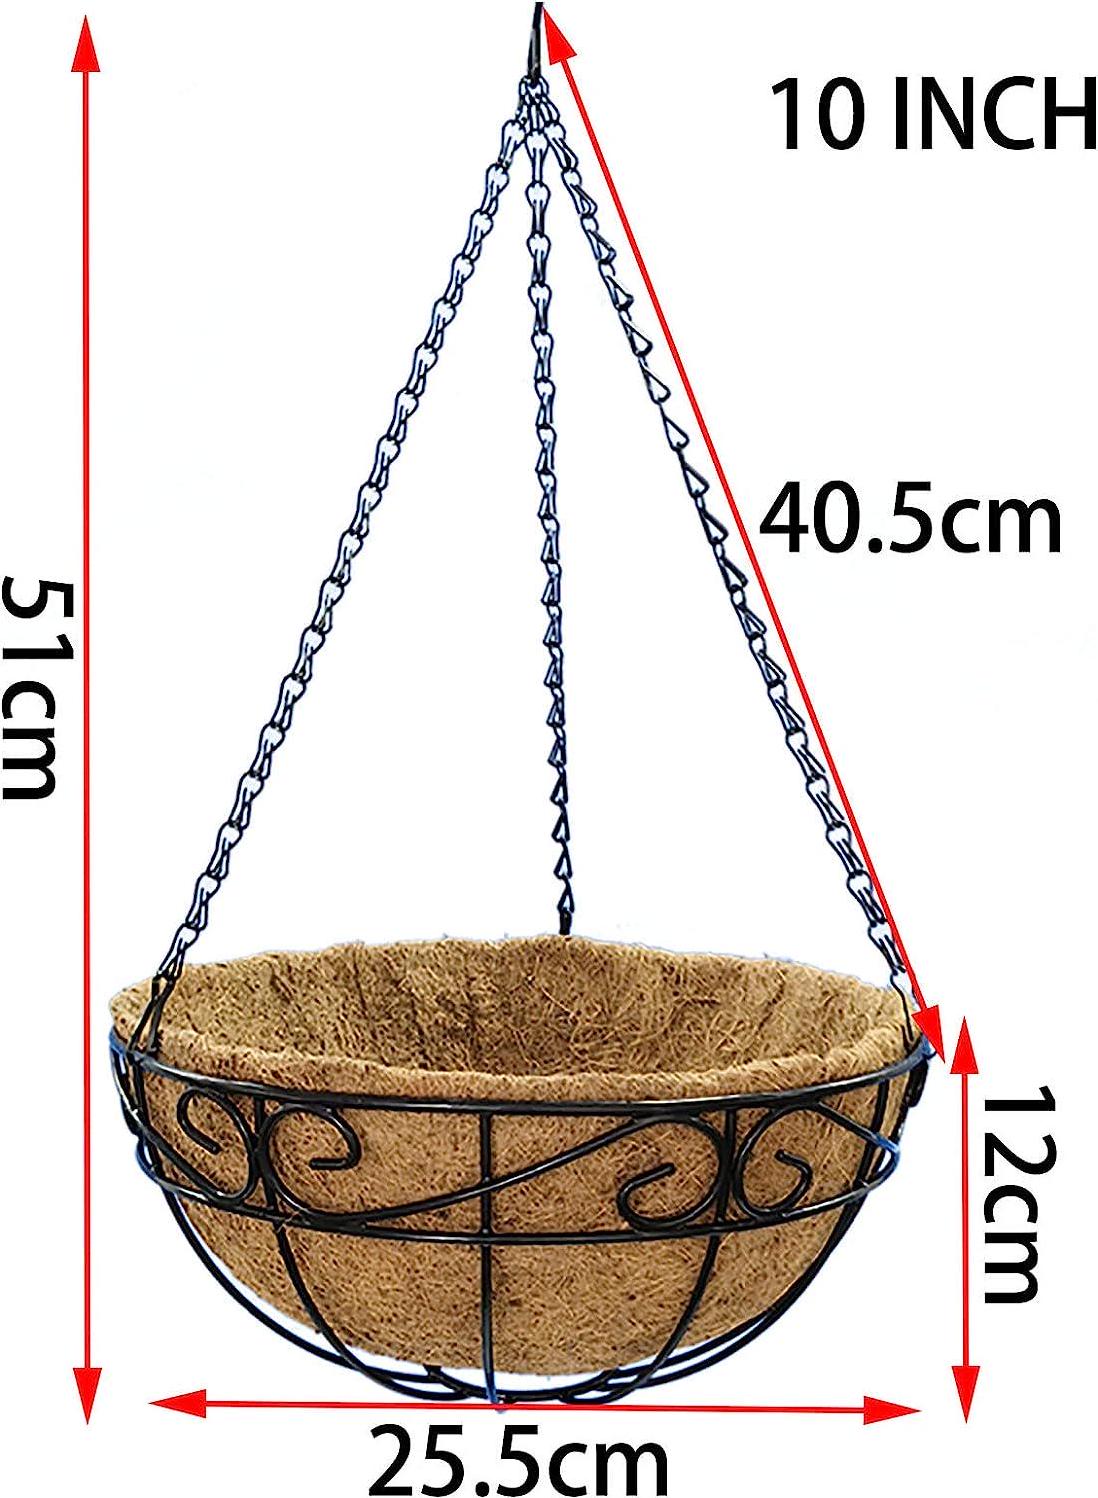 10 inch Metal Hanging Baskets For Plants Outdoor 4 Pack Round Metal Wire Hanging Basket Planter with Coco Fiber Liners Chain Round Wire Plant Holder for Garden, Patio, Deck, Porch Plants Flower Potsss